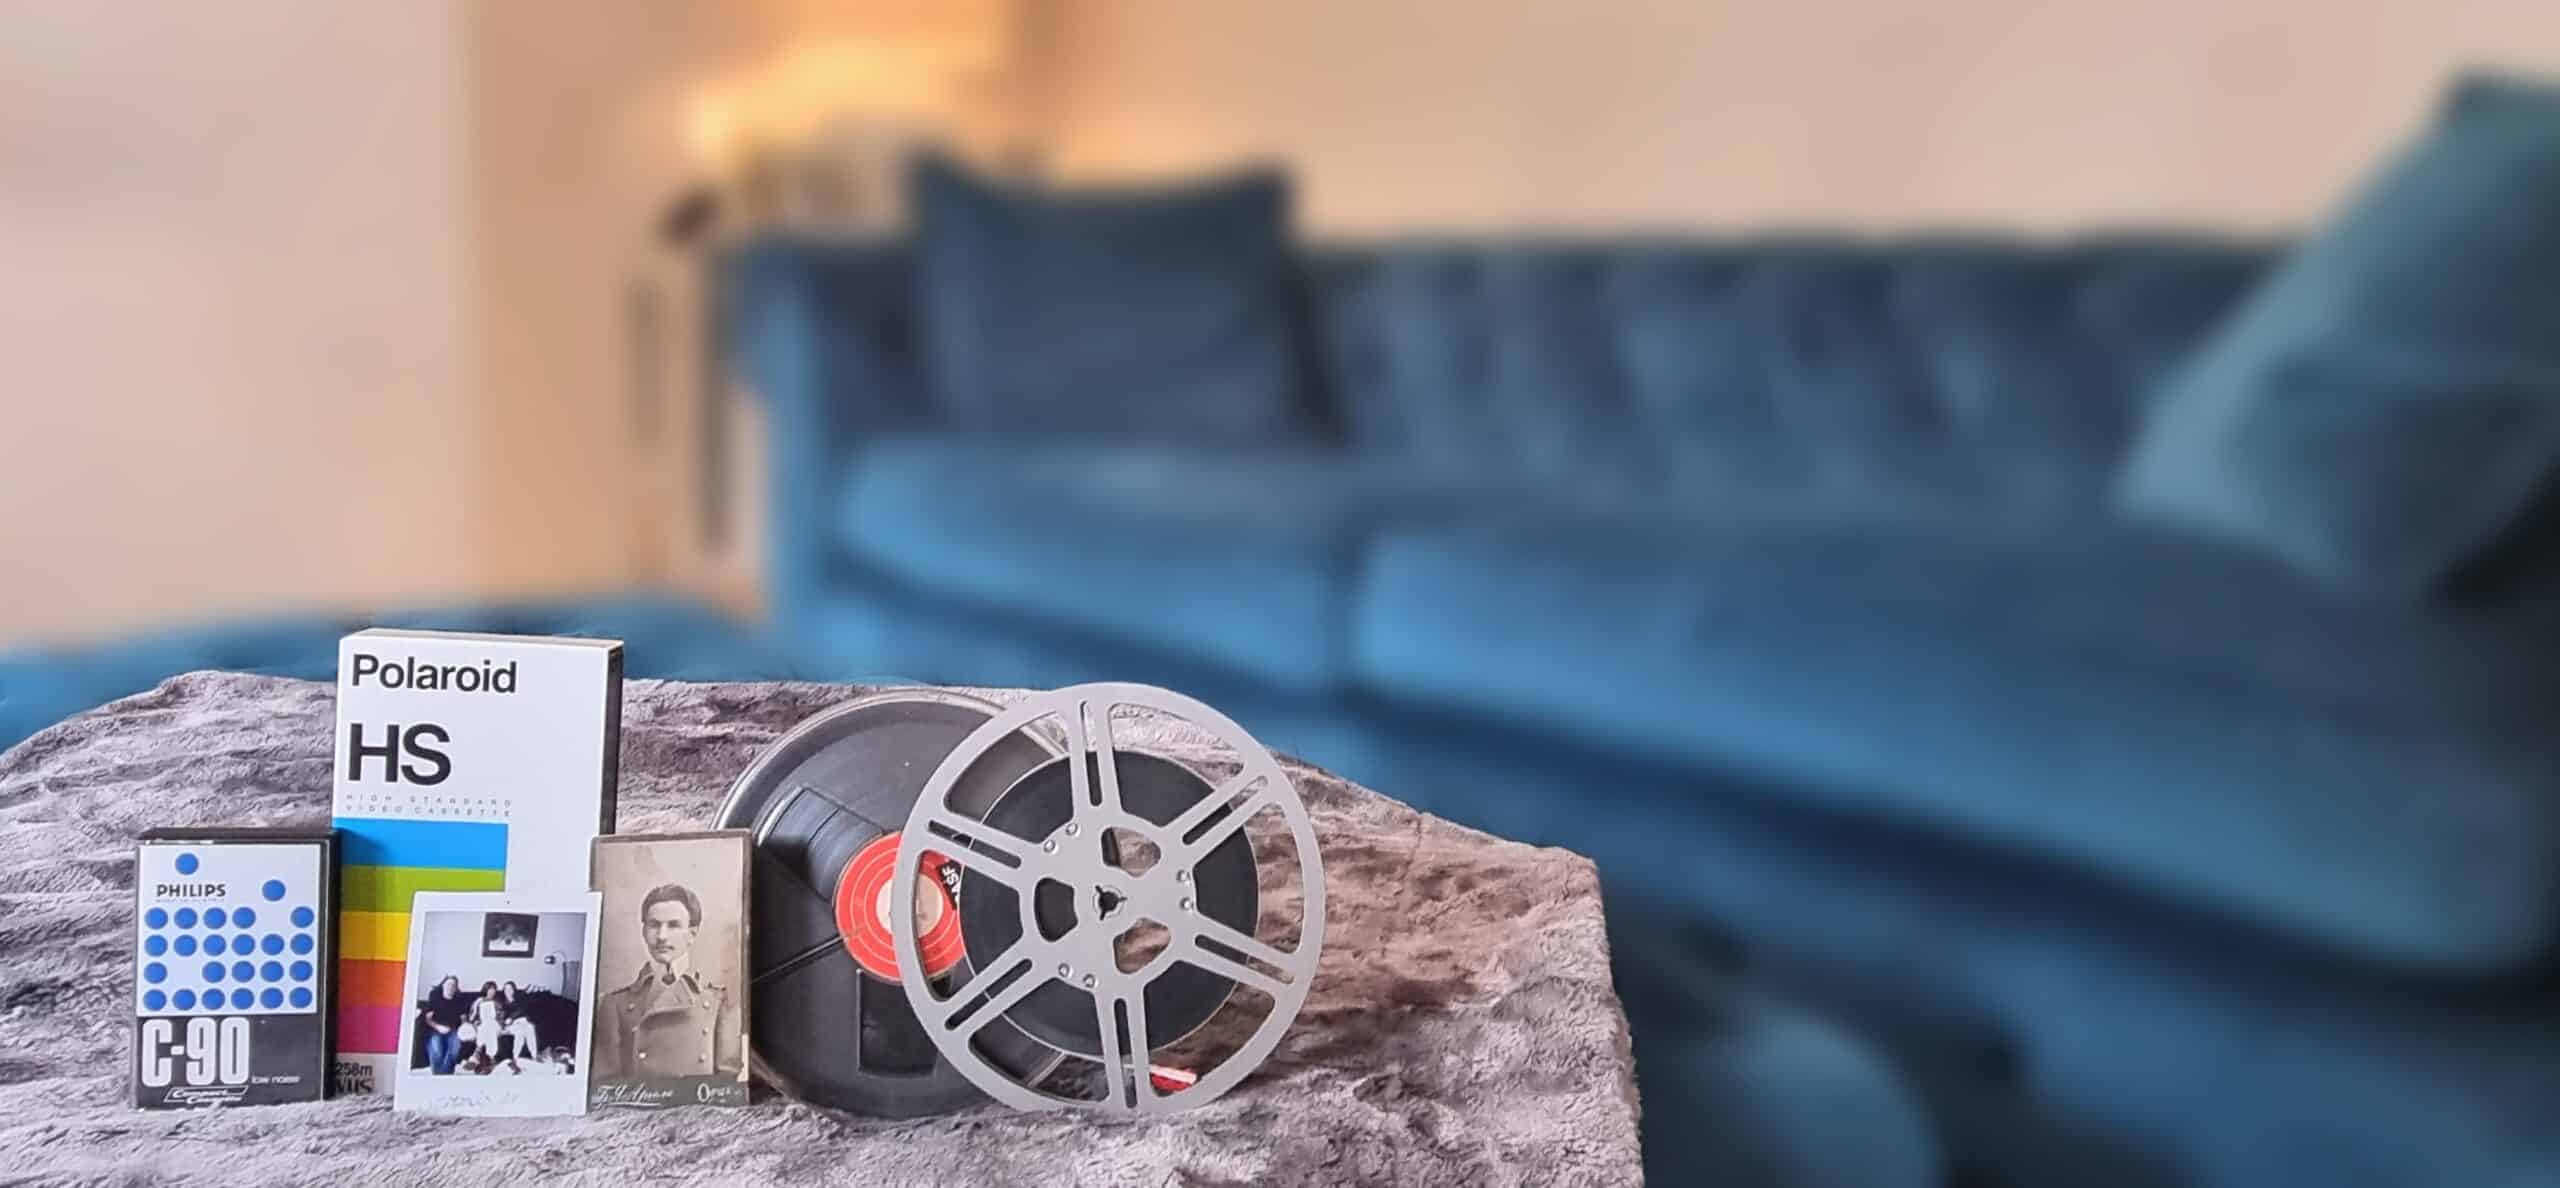 A collection of Cine Film, VHS Tapes and Cassettes on a sofa blue sofa.